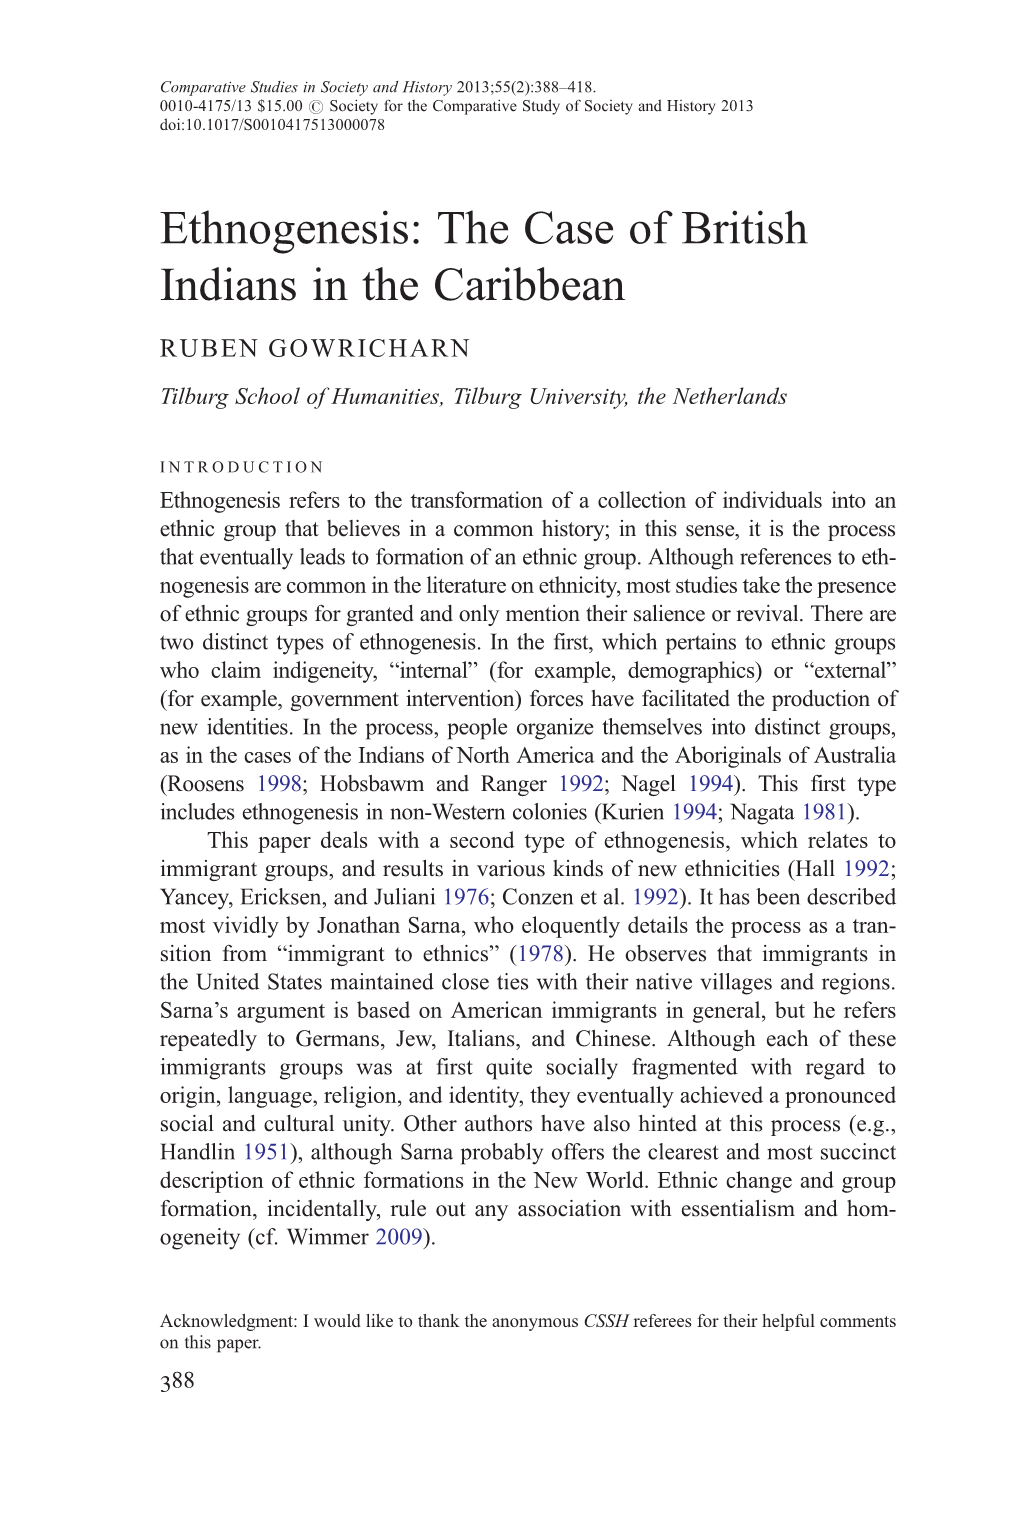 Ethnogenesis: the Case of British Indians in the Caribbean